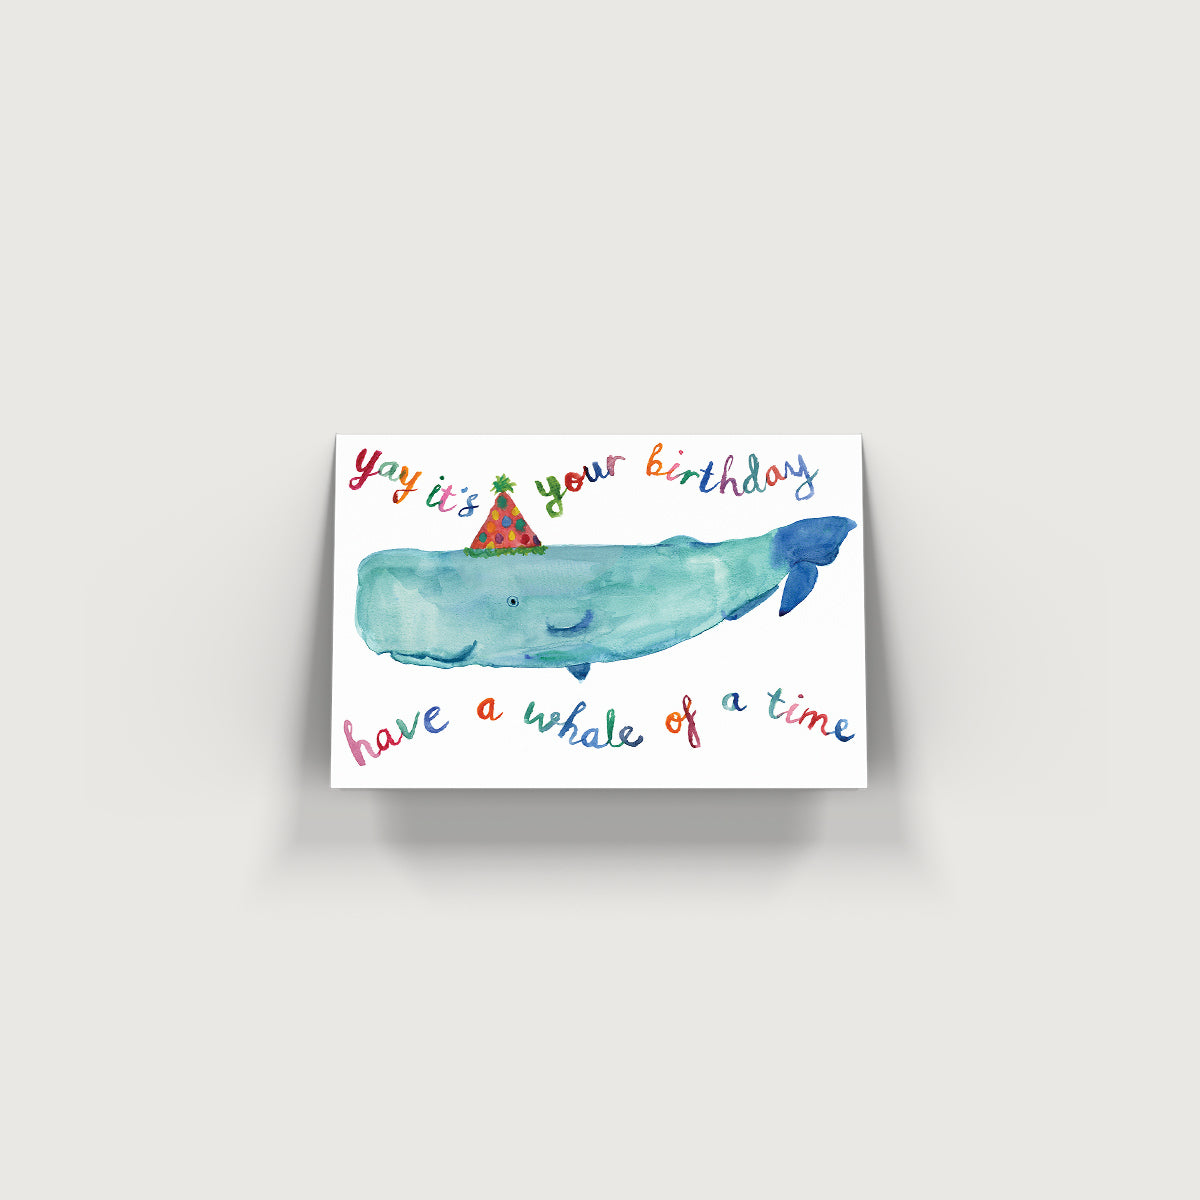 Bristol based watercolour illustrator, Rosie Webb.  Yay its your birthday have a whale of a time, water colour of a whale in a party hat.